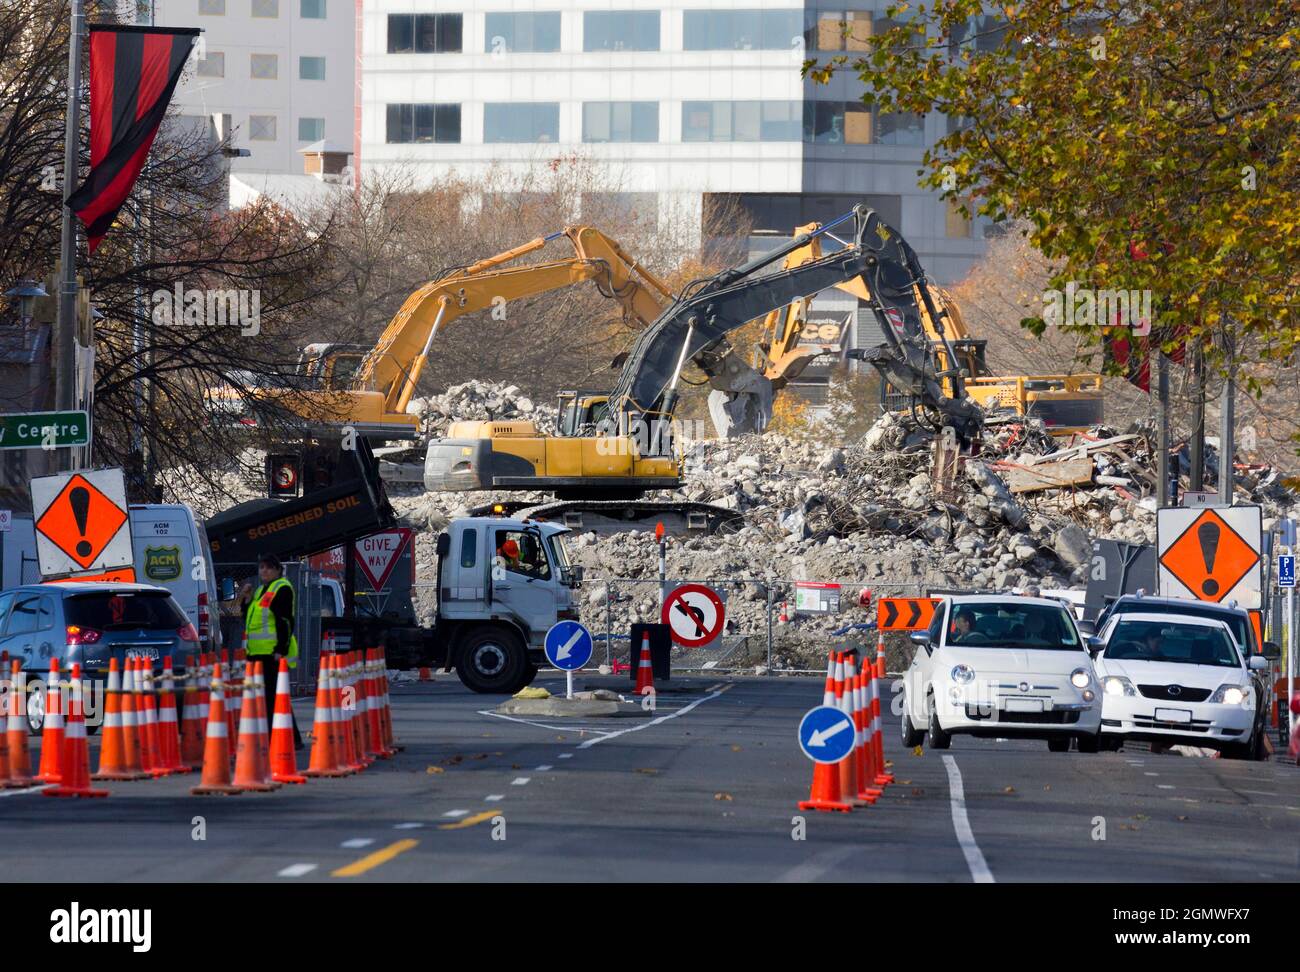 Christchurch, New Zealand - 17 May 2012 A major earthquake, registering 6.3 on the Richter scale, hit Christchurch, New Zealand on 22 February 2011. I Stock Photo